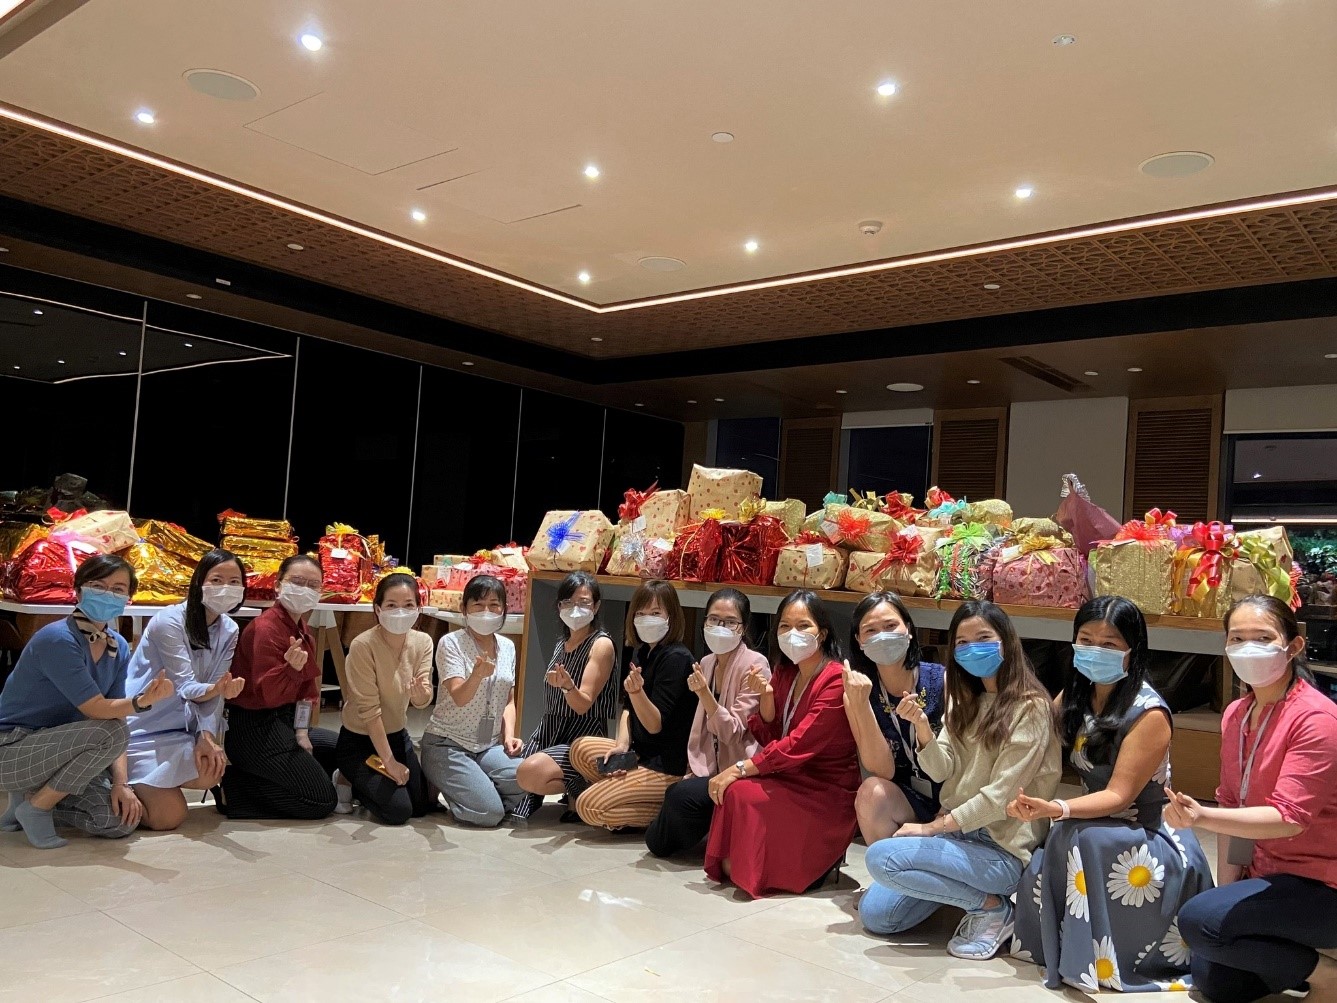 Keppel Land spreads the joy of Christmas through Grant A Wish 2021